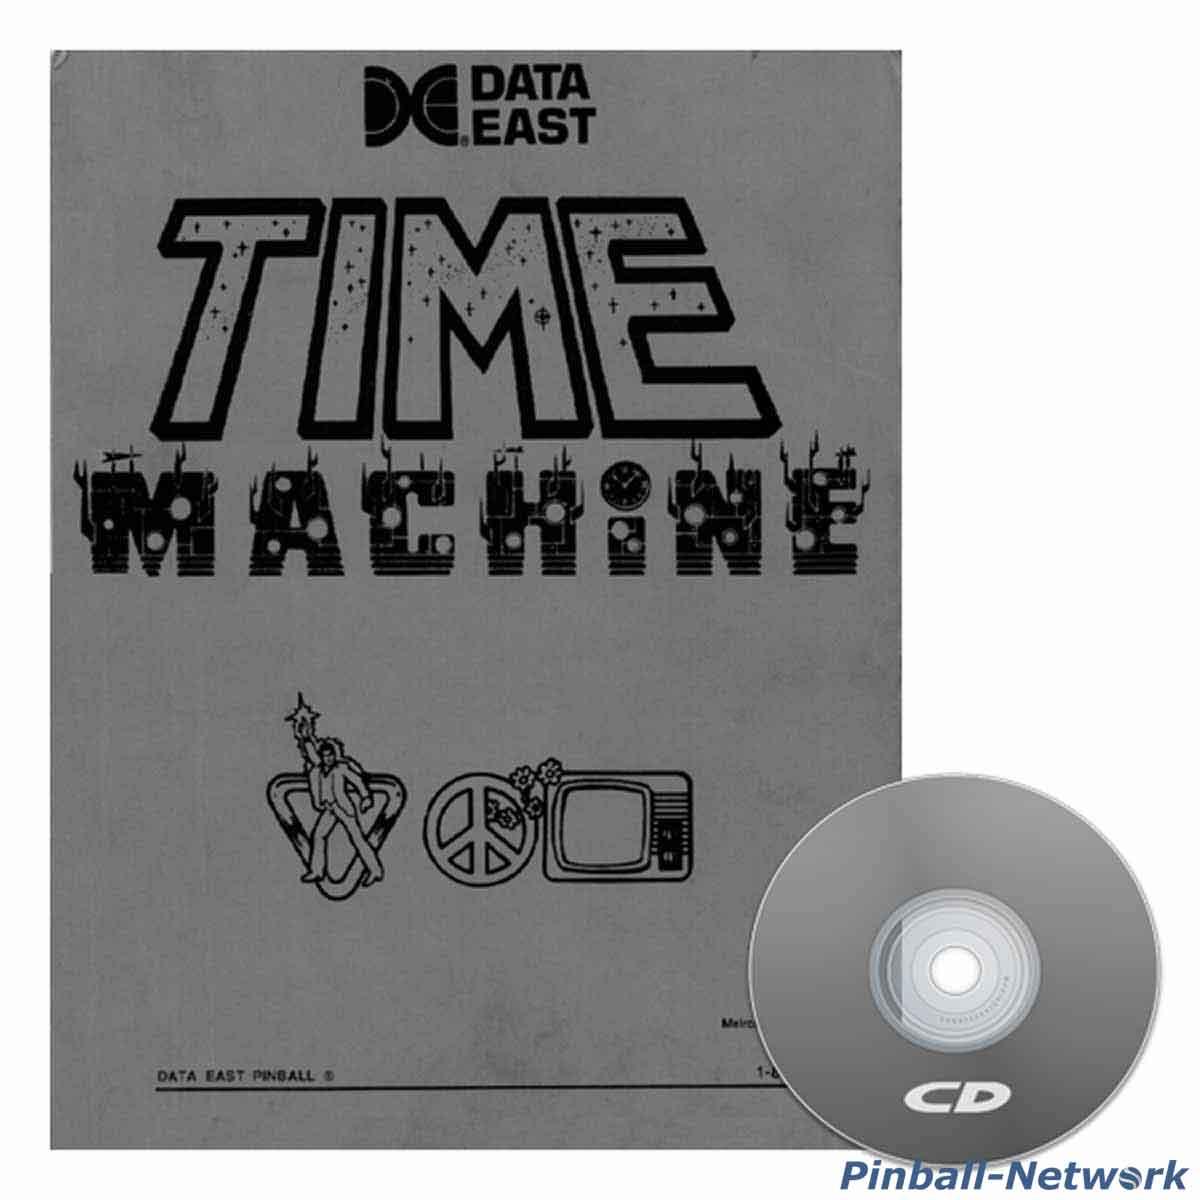 Time Machine Data East Operations Manual